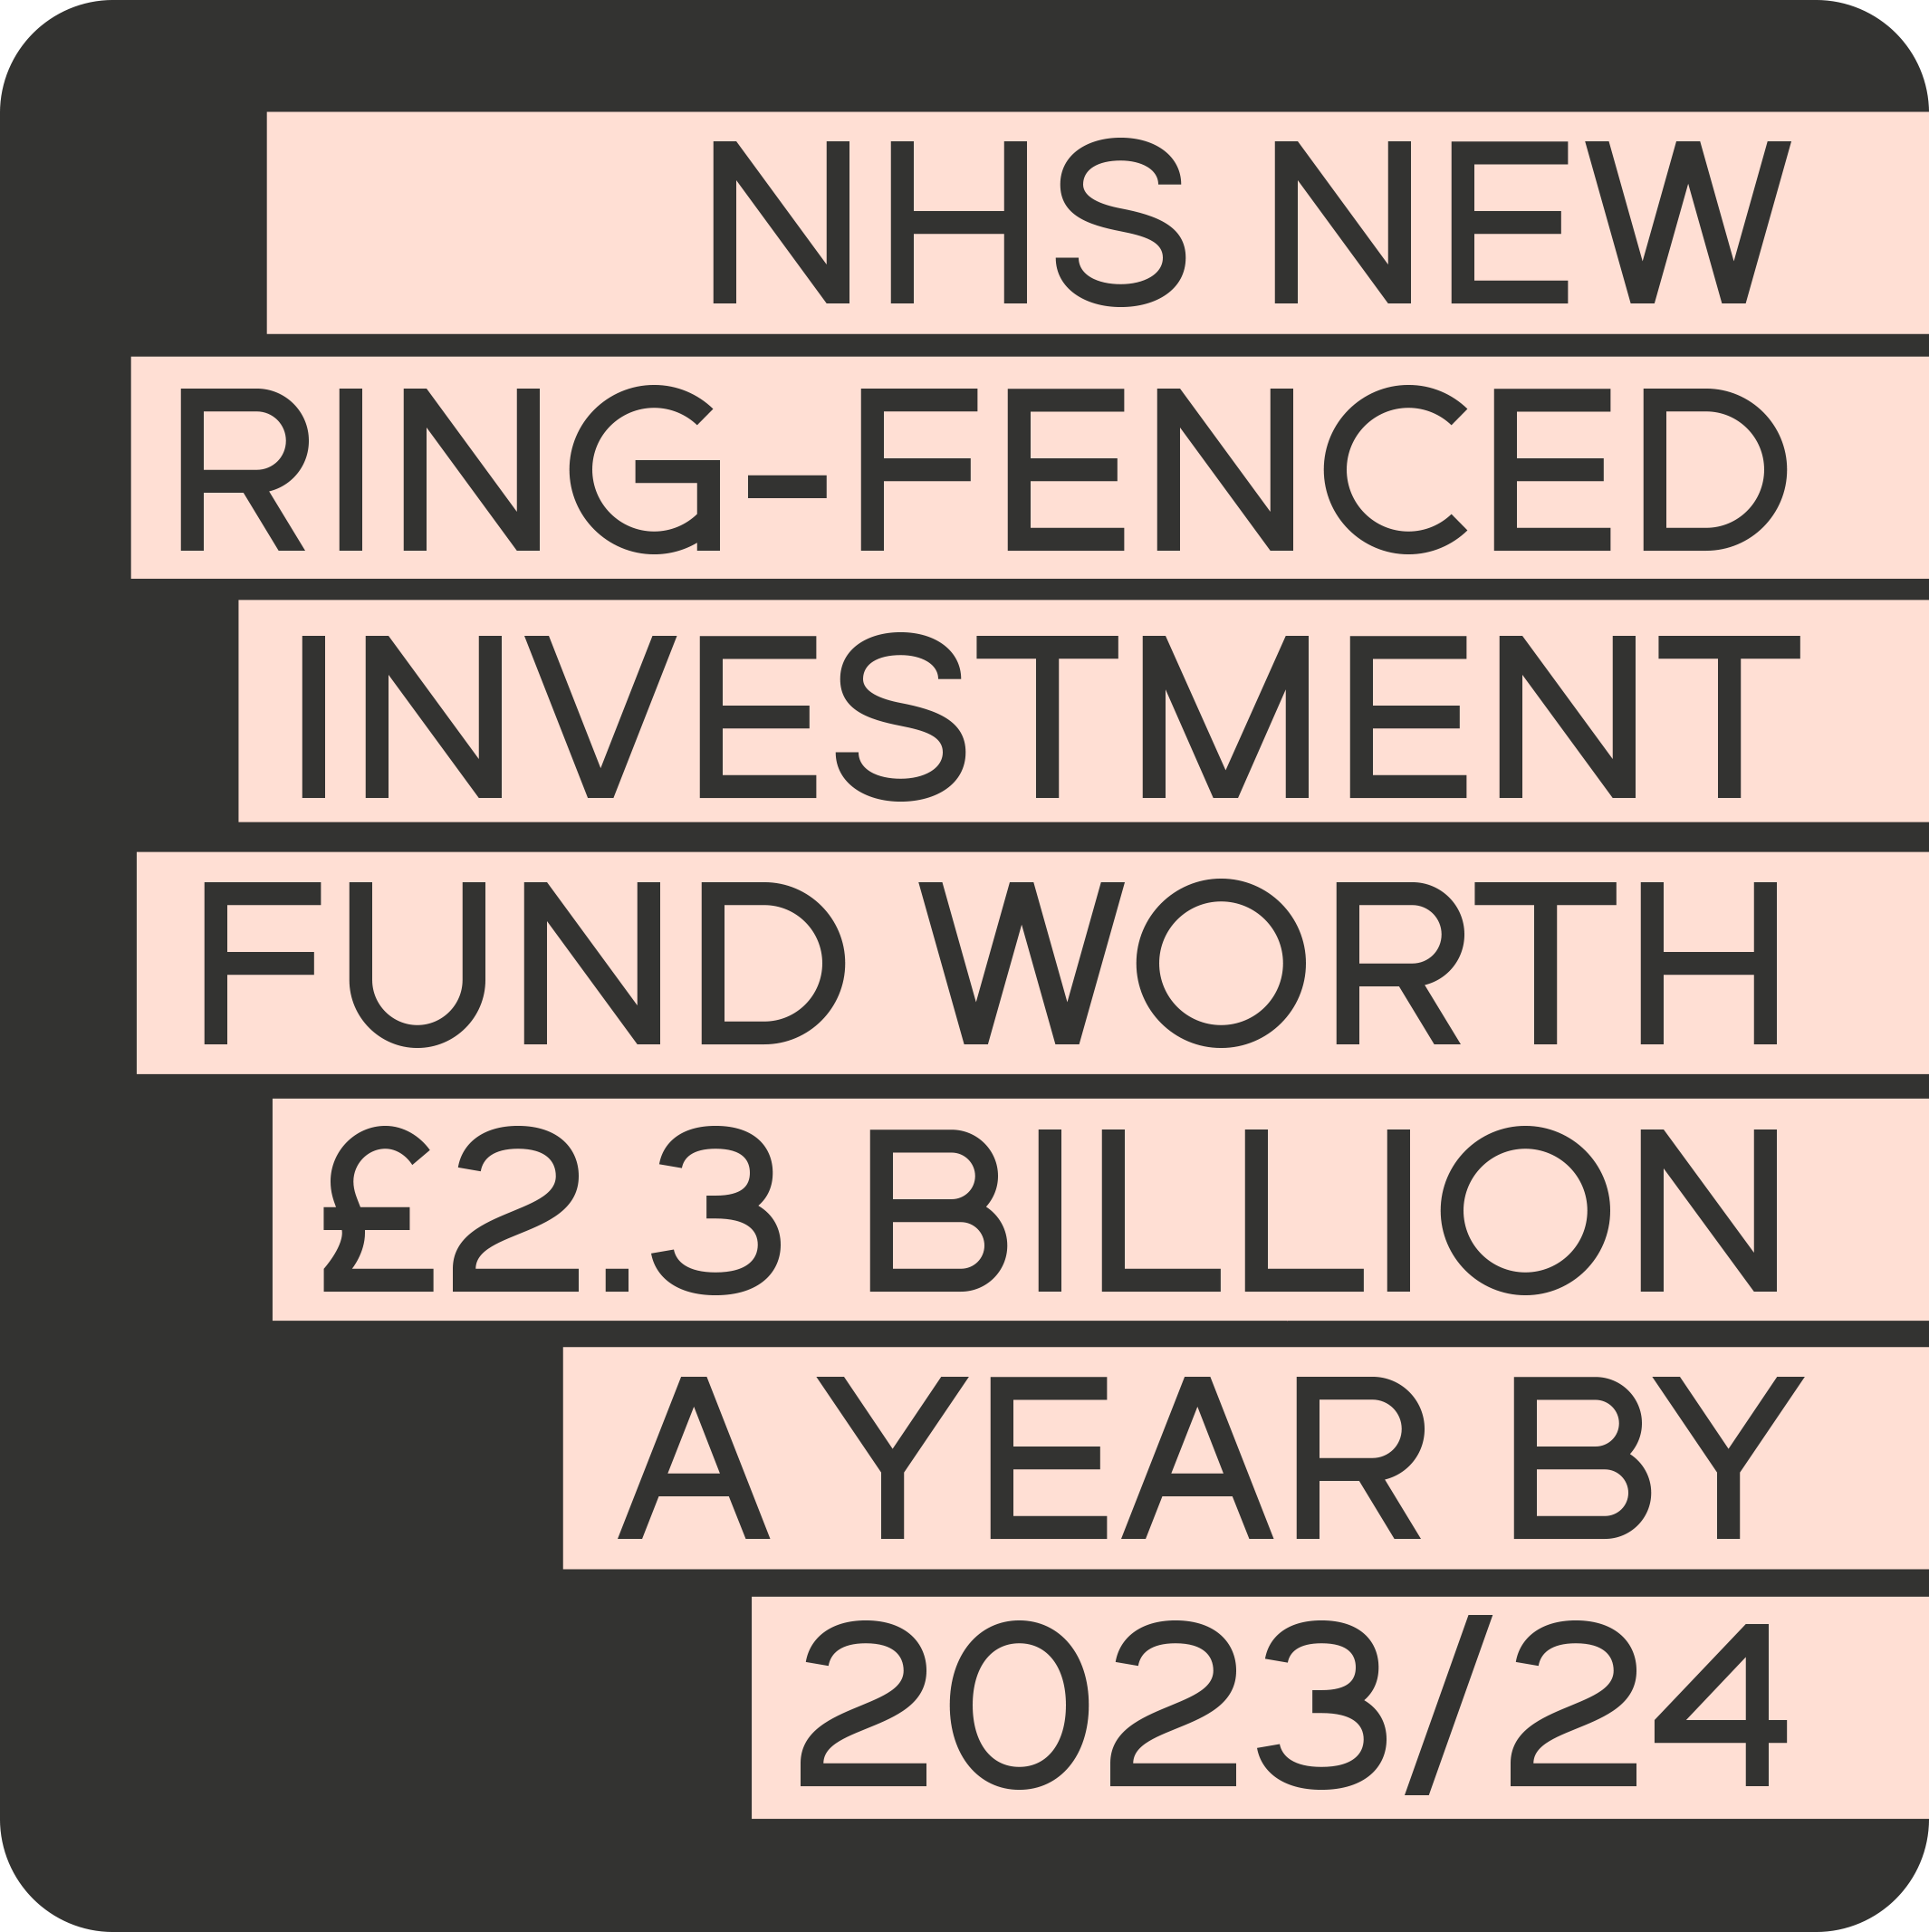 NHS new ing-fenced investment fund worth £2.3 billion a year by 2023/24